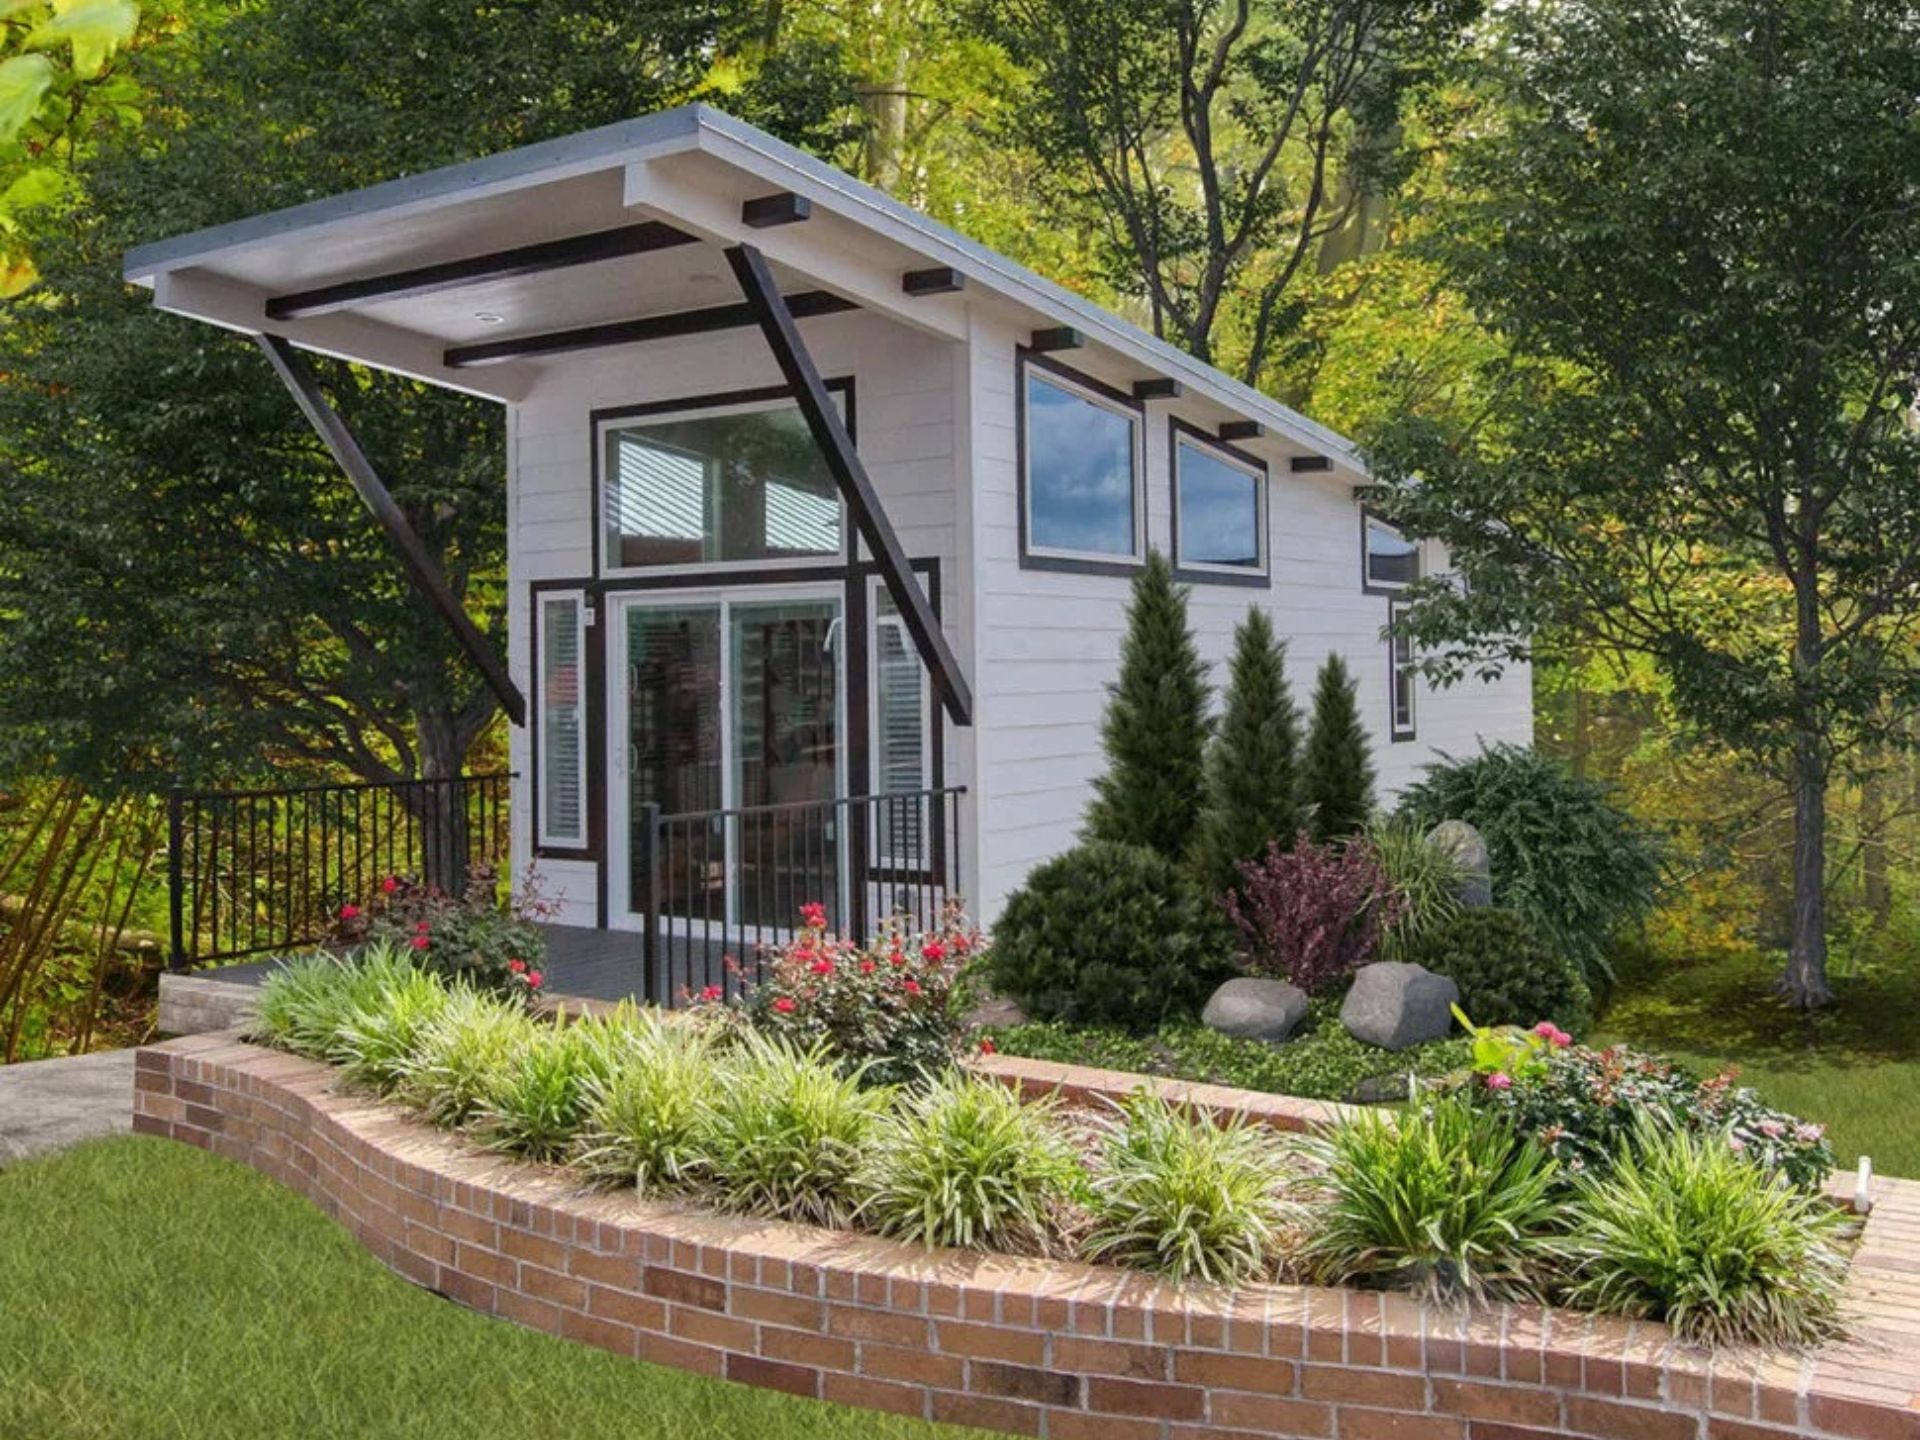 The Huntington tiny home with a beautiful garden in front of it